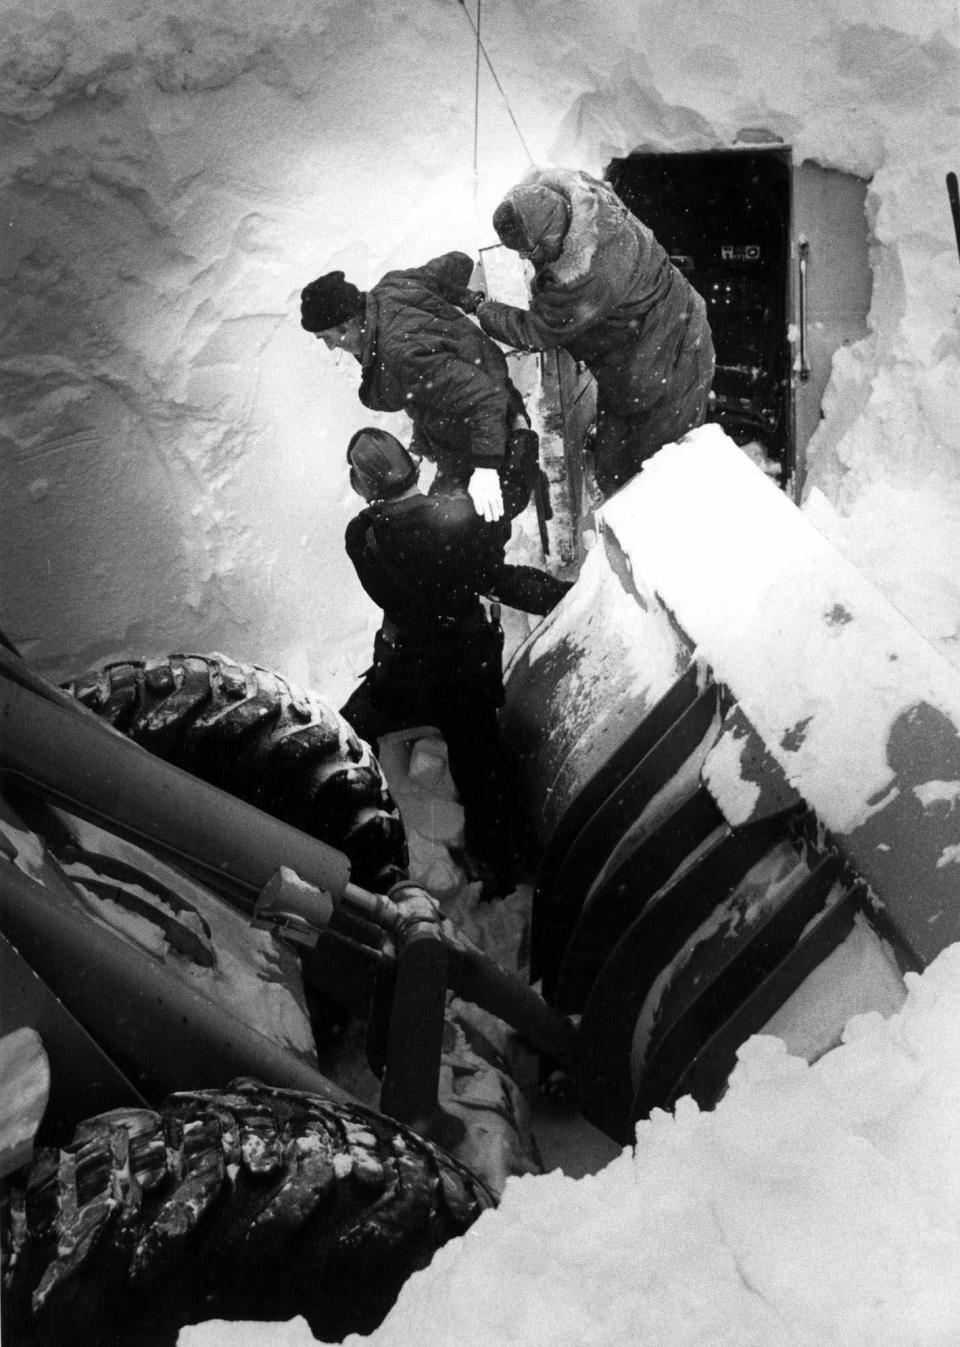 Truck driver James Truly is helped from the cab of his rig after spending most of five days buried in the truck beneath a huge snowdrift in Mansfield, Ohio, Jan. 31, 1978. Truly stopped his semi-tractor trailer along Ohio Route 13 north of Mansfield during a massive blizzard. The storm raged for several days and snow completely covered the big rig. No one knew for a couple of days that Truly and his truck were in the drift. He was finally discovered on Jan. 31 when Ohio Air National Guard personnel were opening the state highway with a big snowblower.